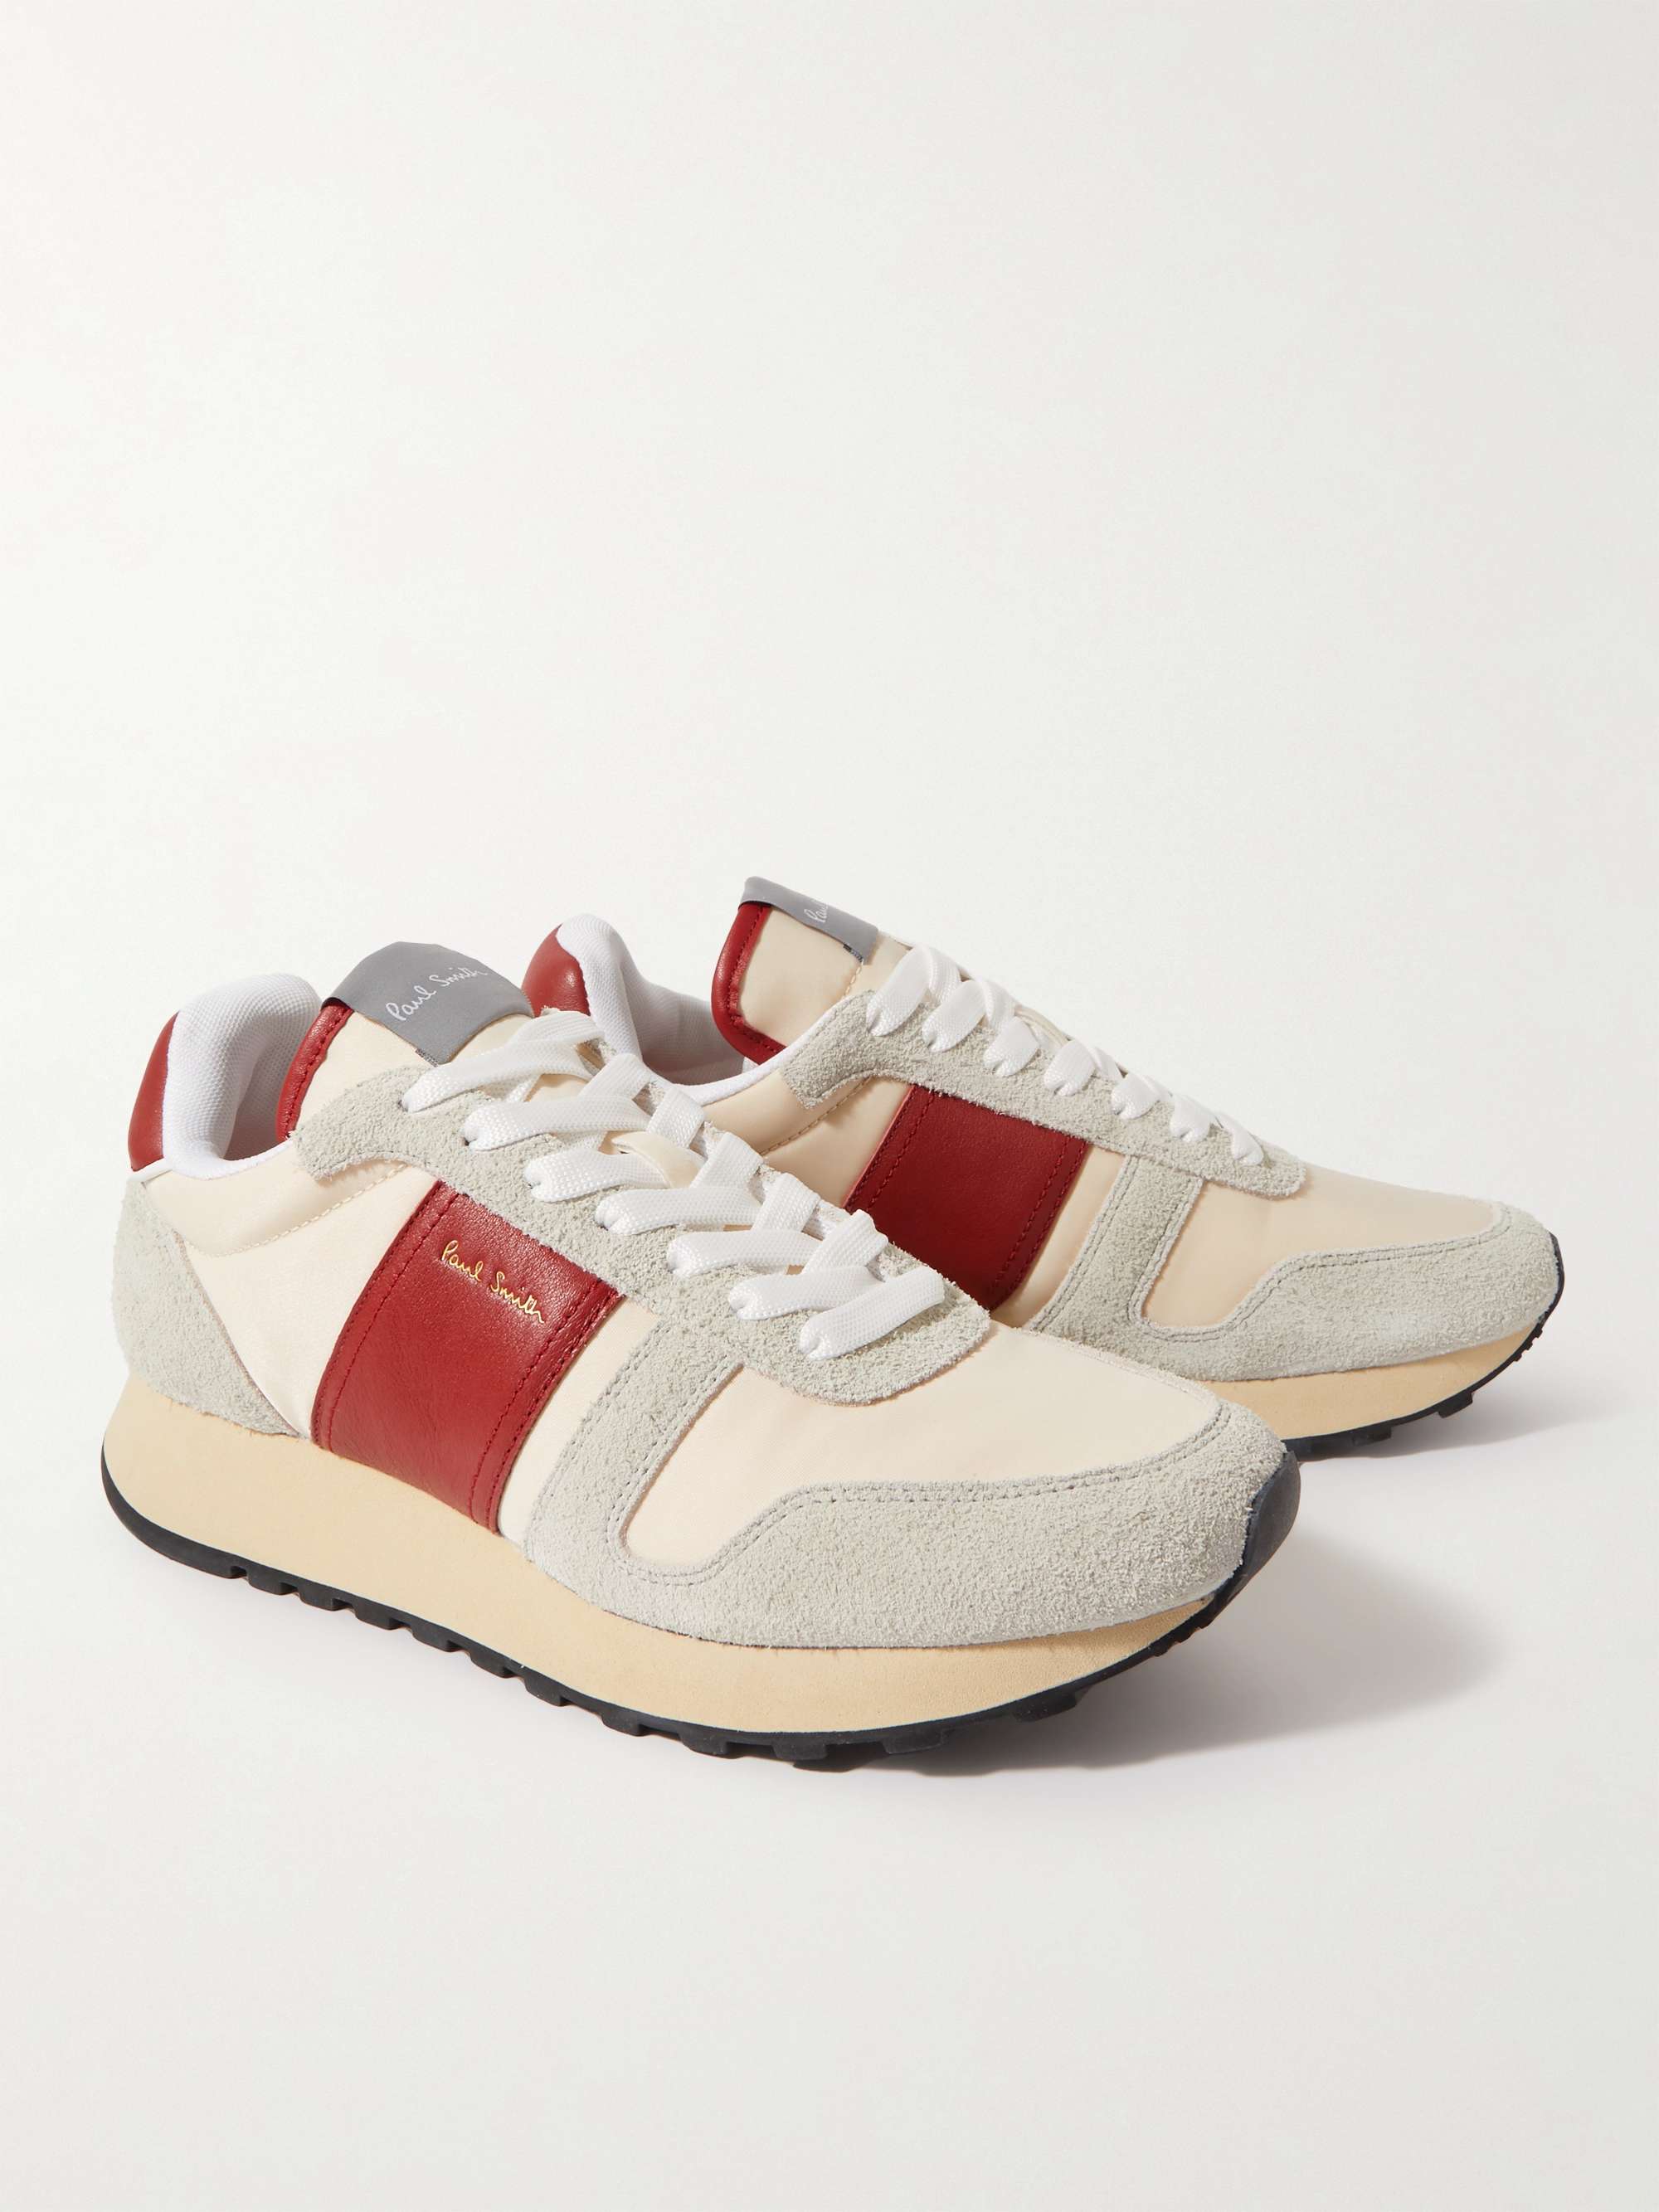 PAUL SMITH Eighties Suede and Leather Sneakers for Men | MR PORTER